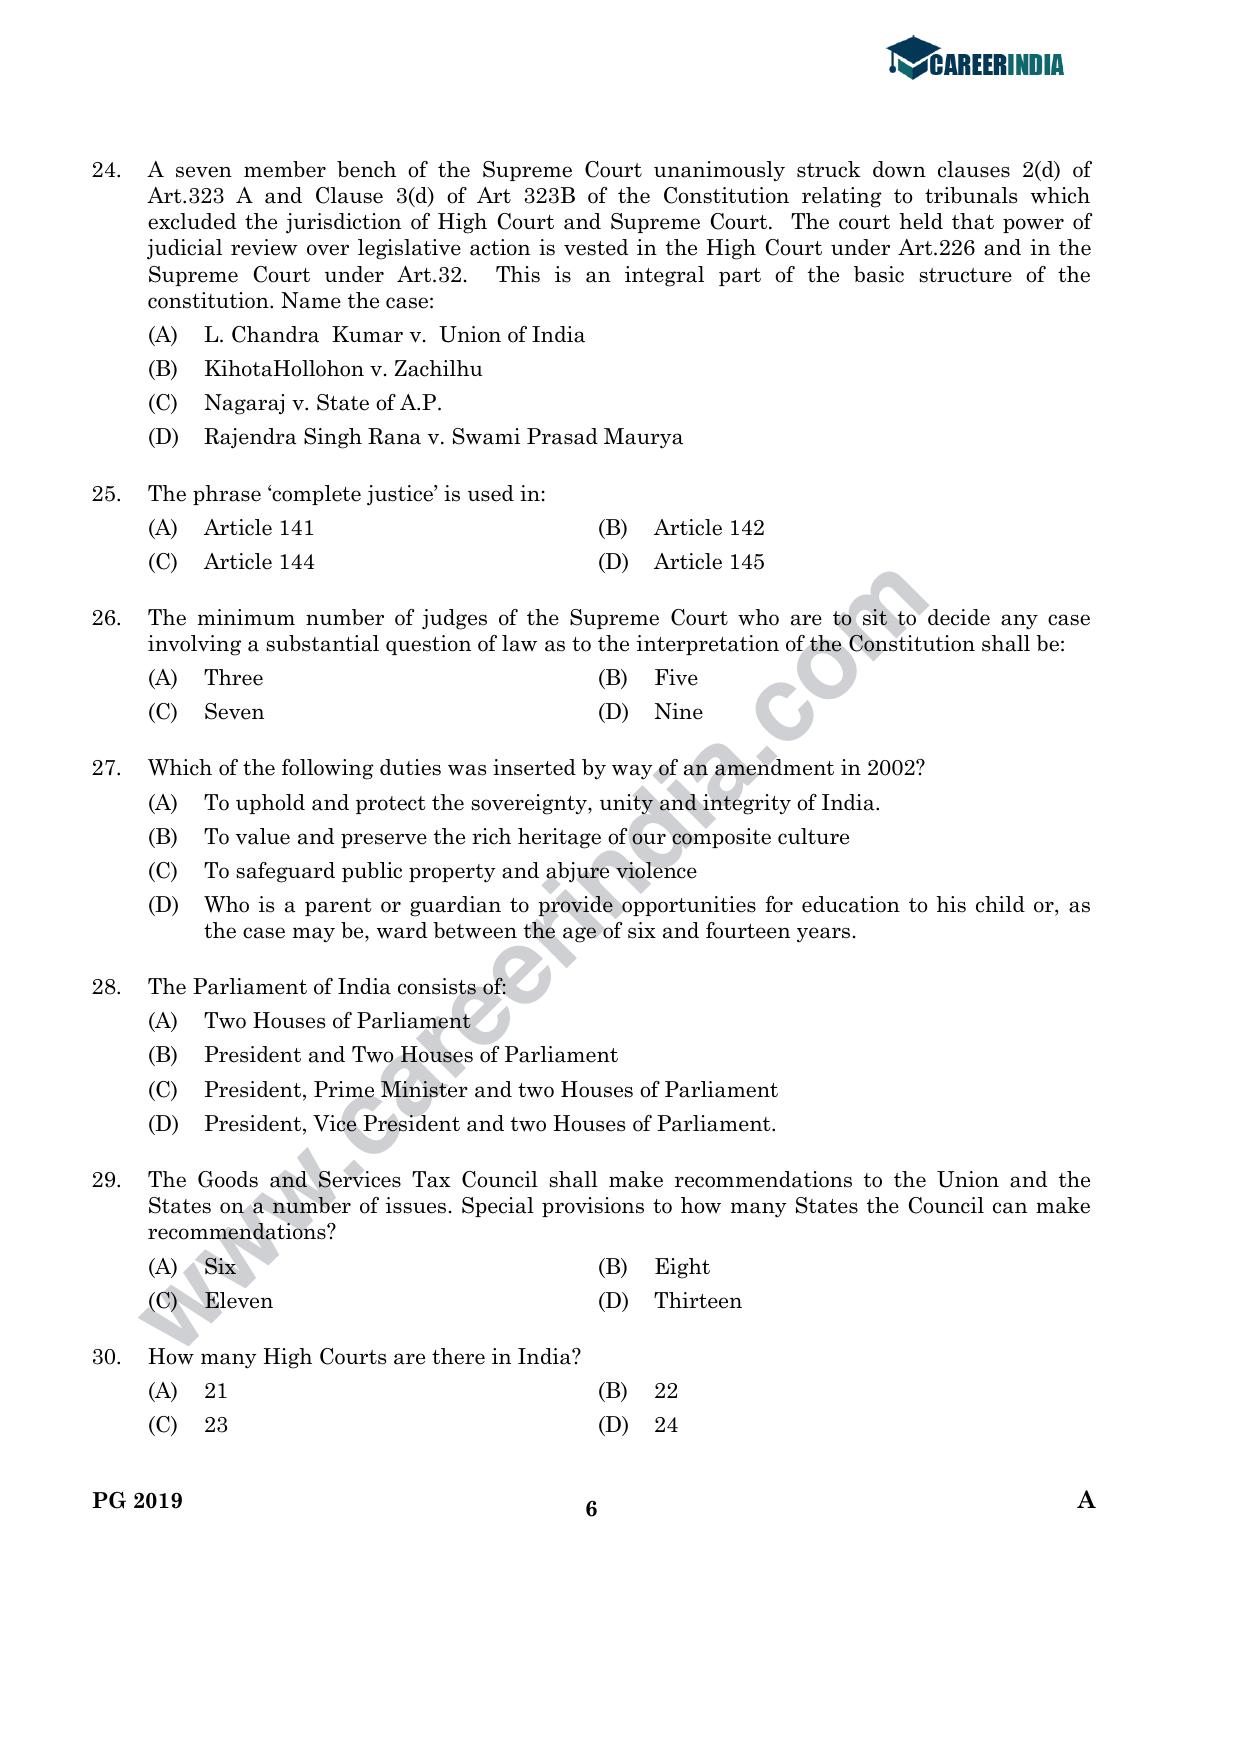 CLAT 2019 PG A-Series Question Papers (C.L.A.) - Page 5